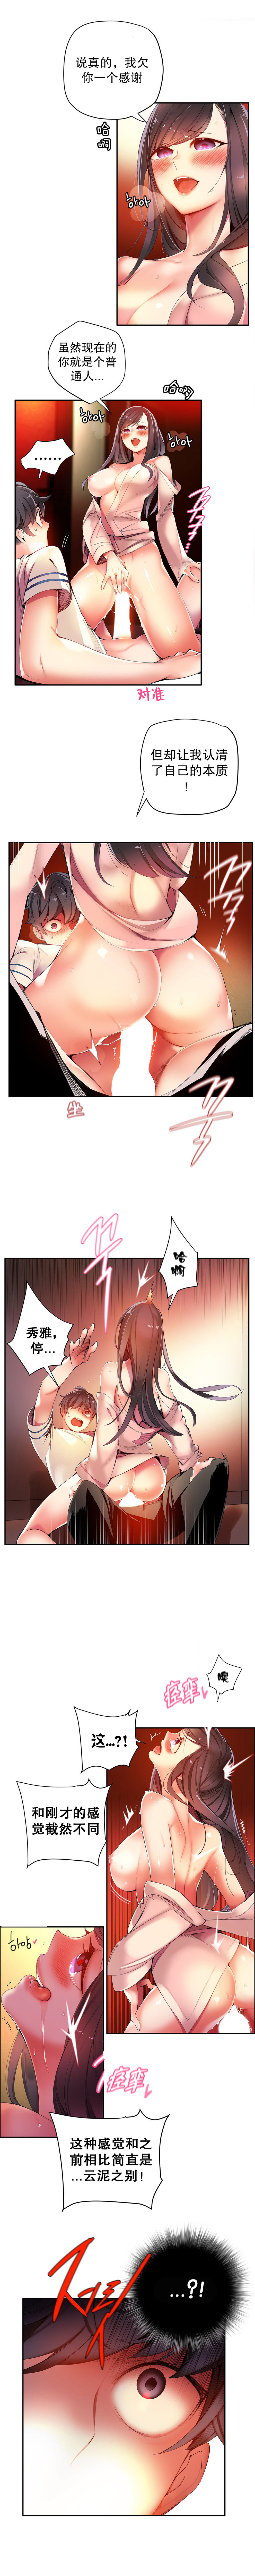 [Juder] Lilith`s Cord | 莉莉丝的脐带 Ch.1-51 [Chinese] 